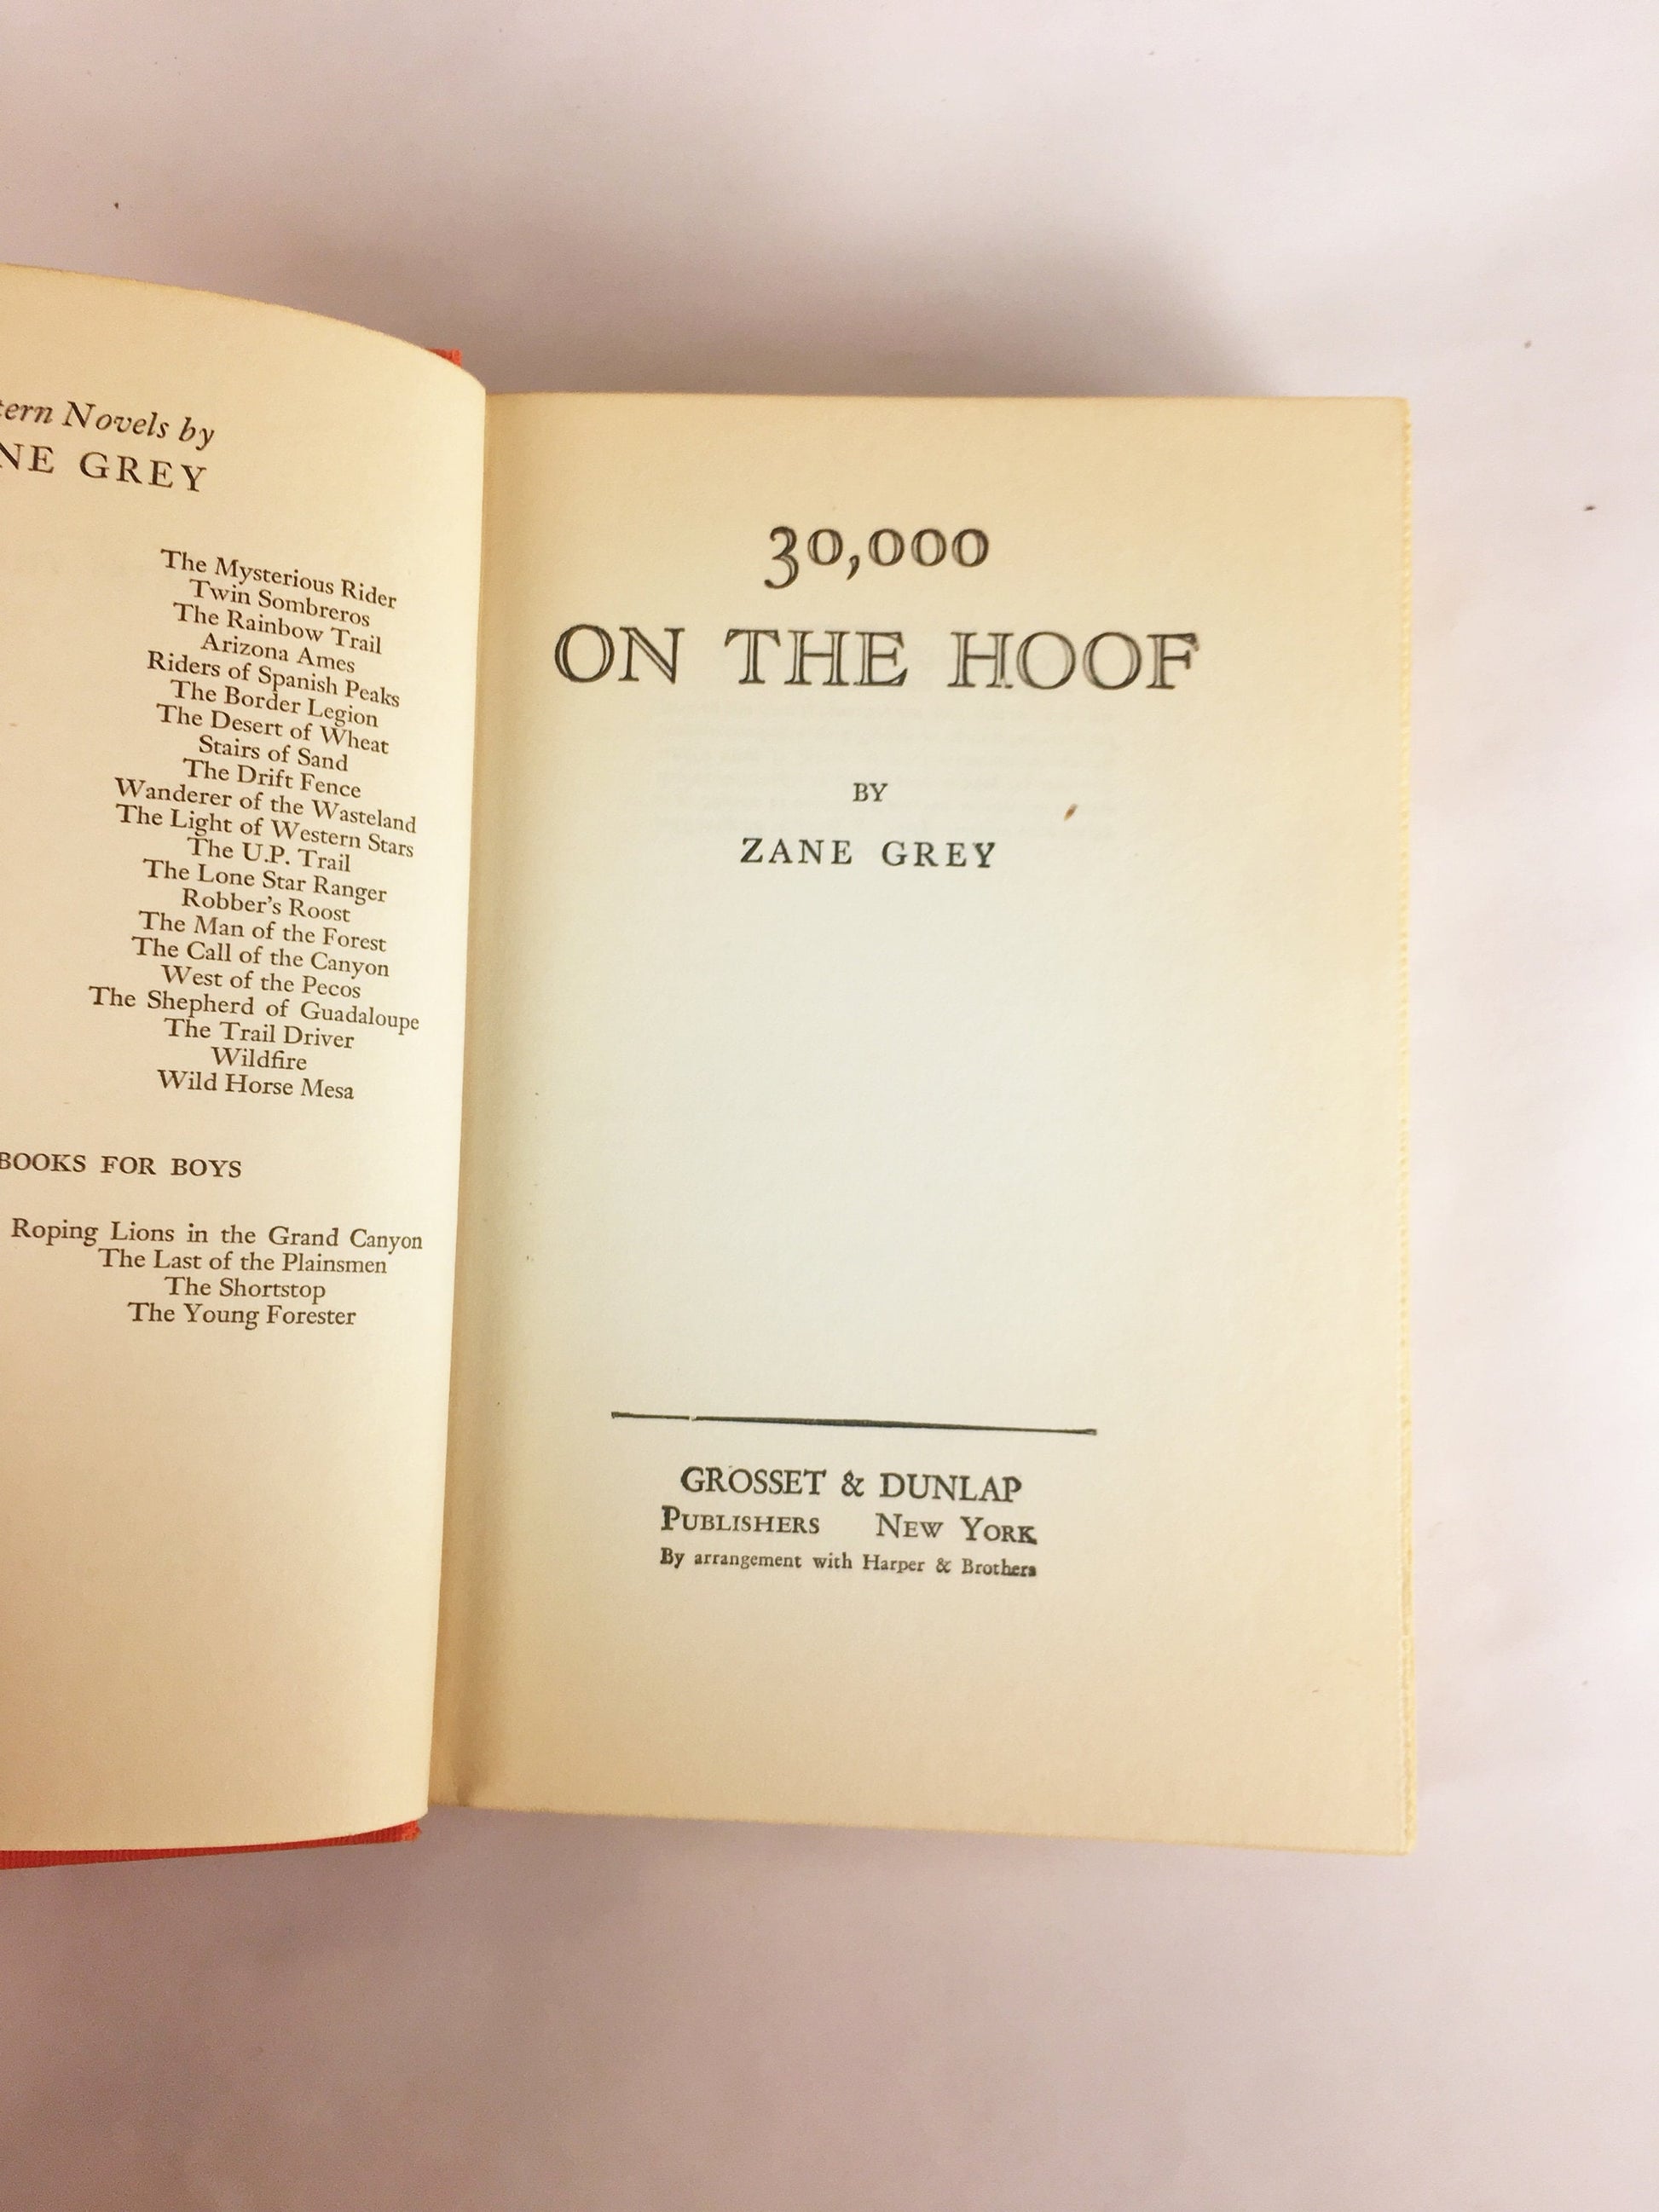 Zane Grey 30,000 on the Hoof. Vintage book circa 1940. Story of a frontier wife during the pioneer days in the Old Wild West. Red book decor